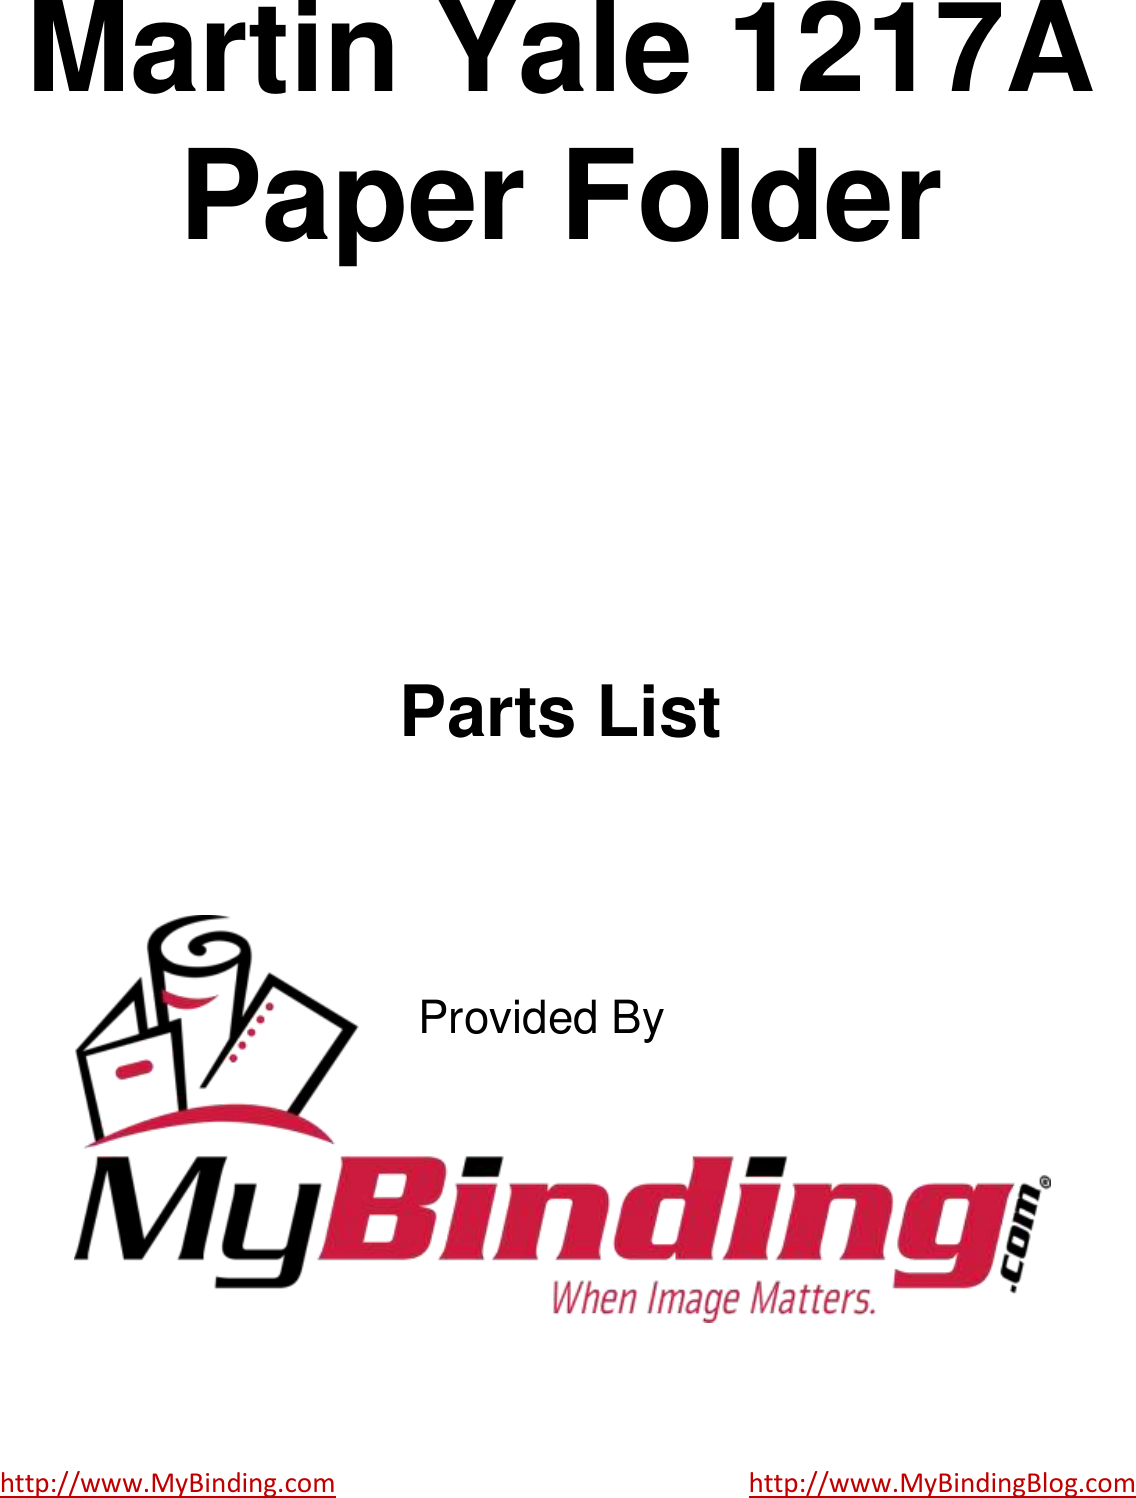 Page 1 of 6 - MyBinding Martinyale-1217A-Parts User Manual Martin Yale-1217A-Parts